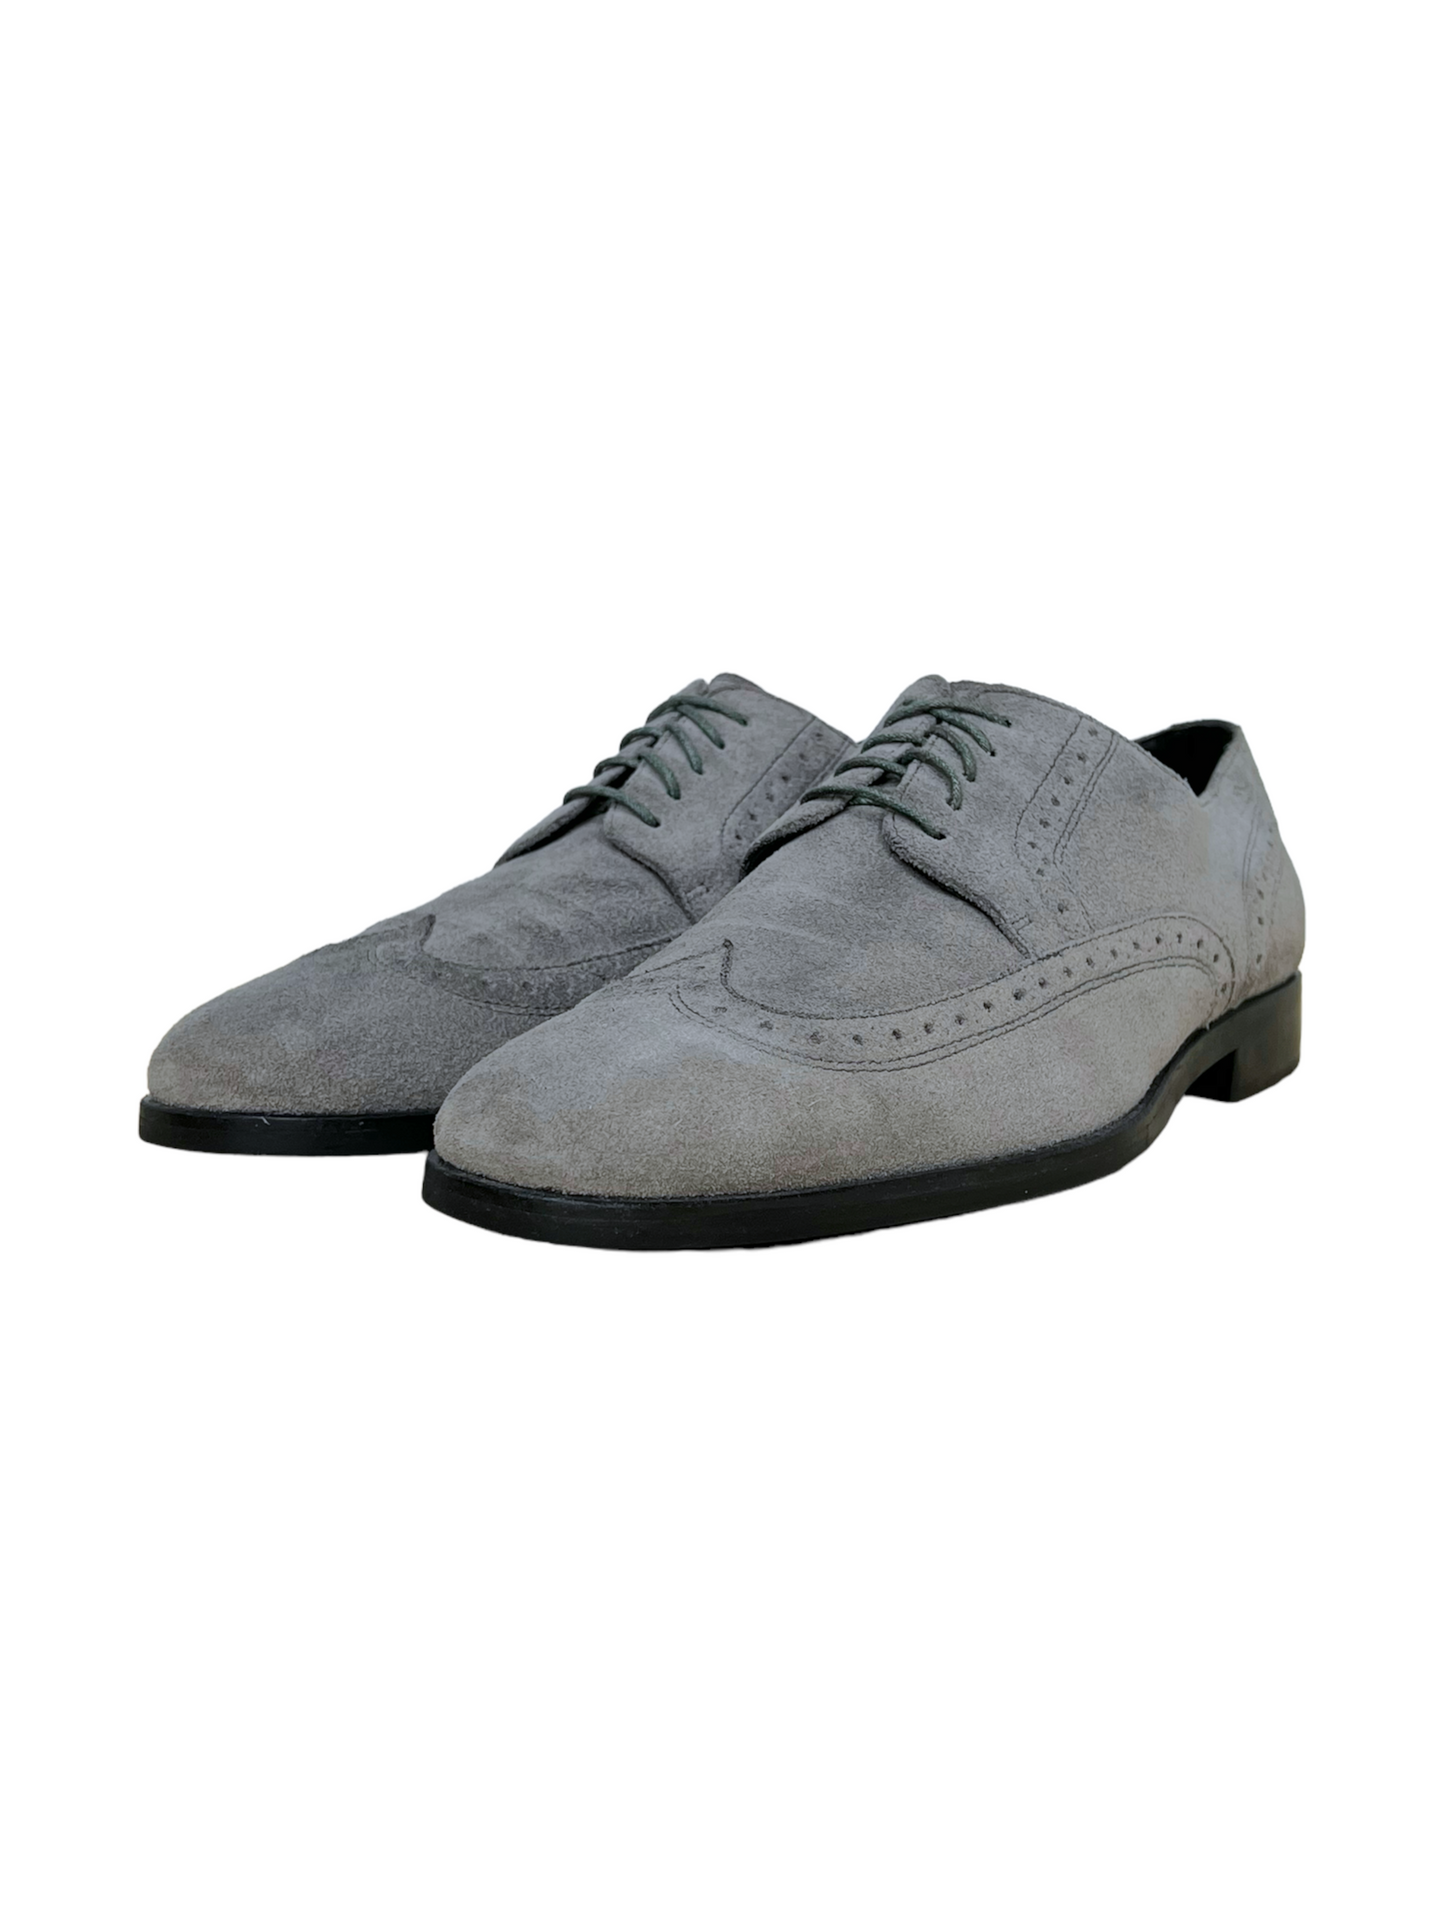 Hugo Boss Grey Suede Matano Wingtip Derby Shoes - Genuine Design Luxury Consignment for Men. New & Pre-Owned Clothing, Shoes, & Accessories. Calgary, Canada